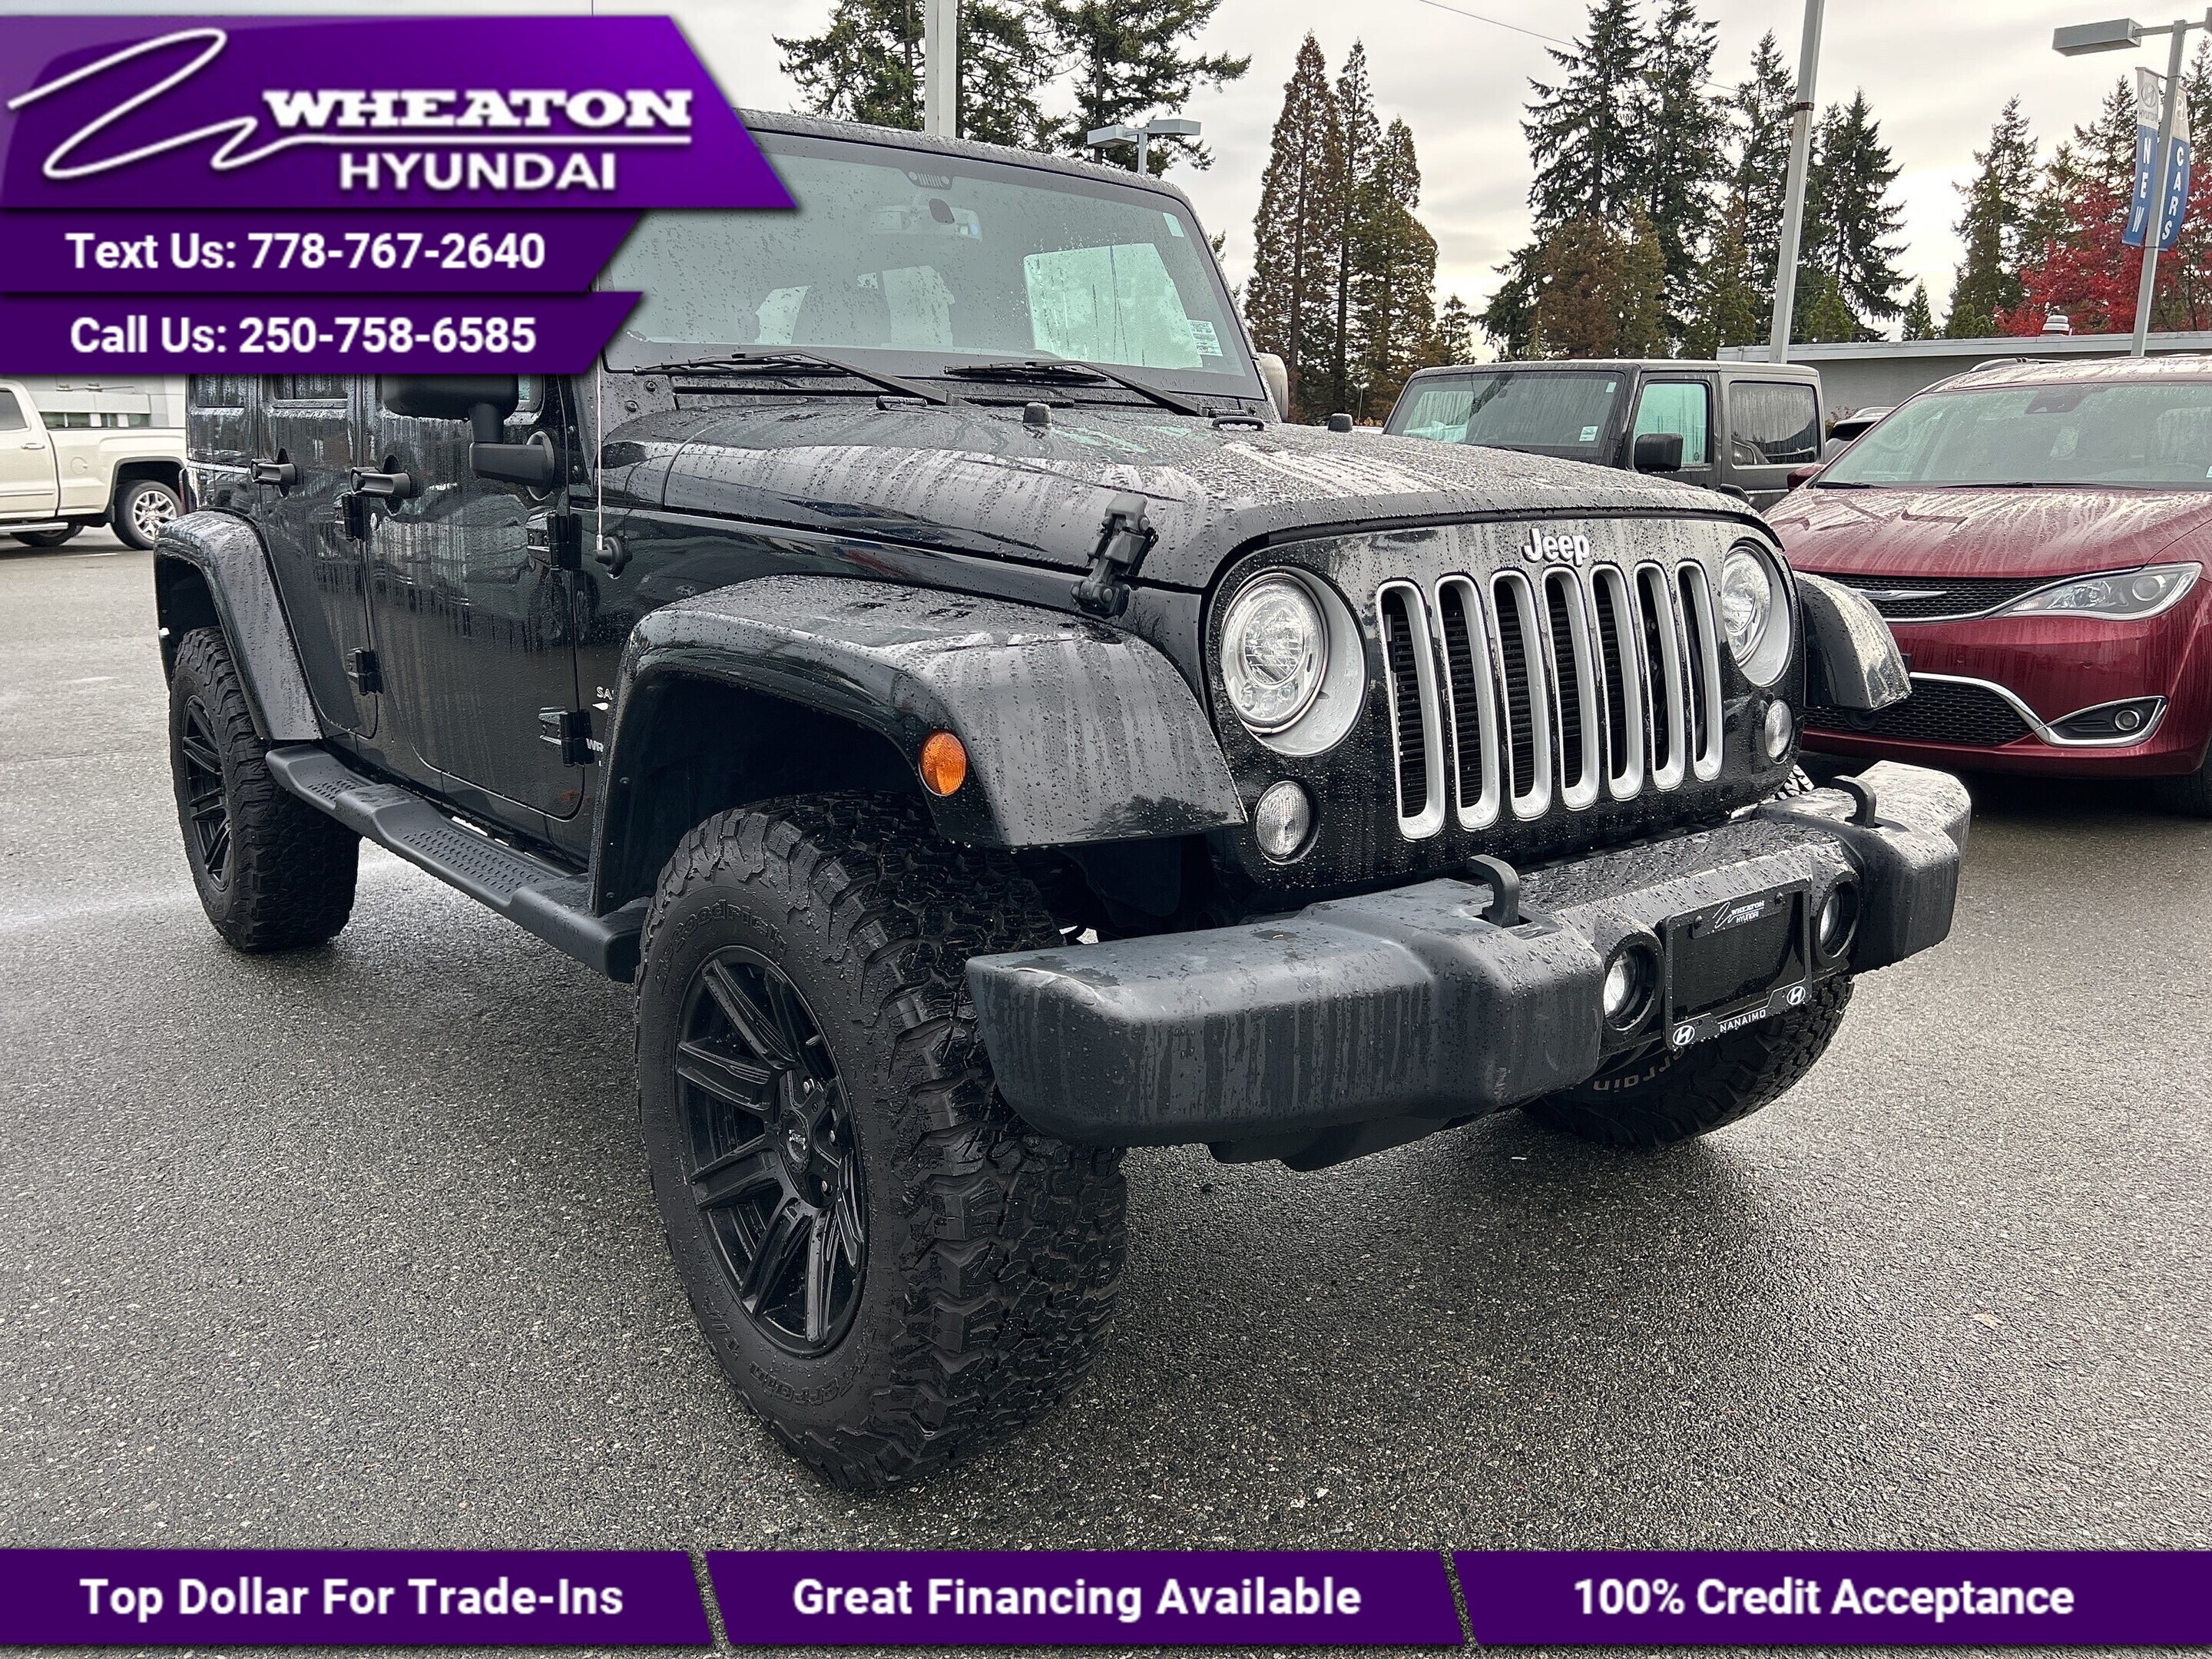 2018 Jeep Wrangler JK Unlimited Sahara, Local, Trade in, Leather, Heated Seats, To